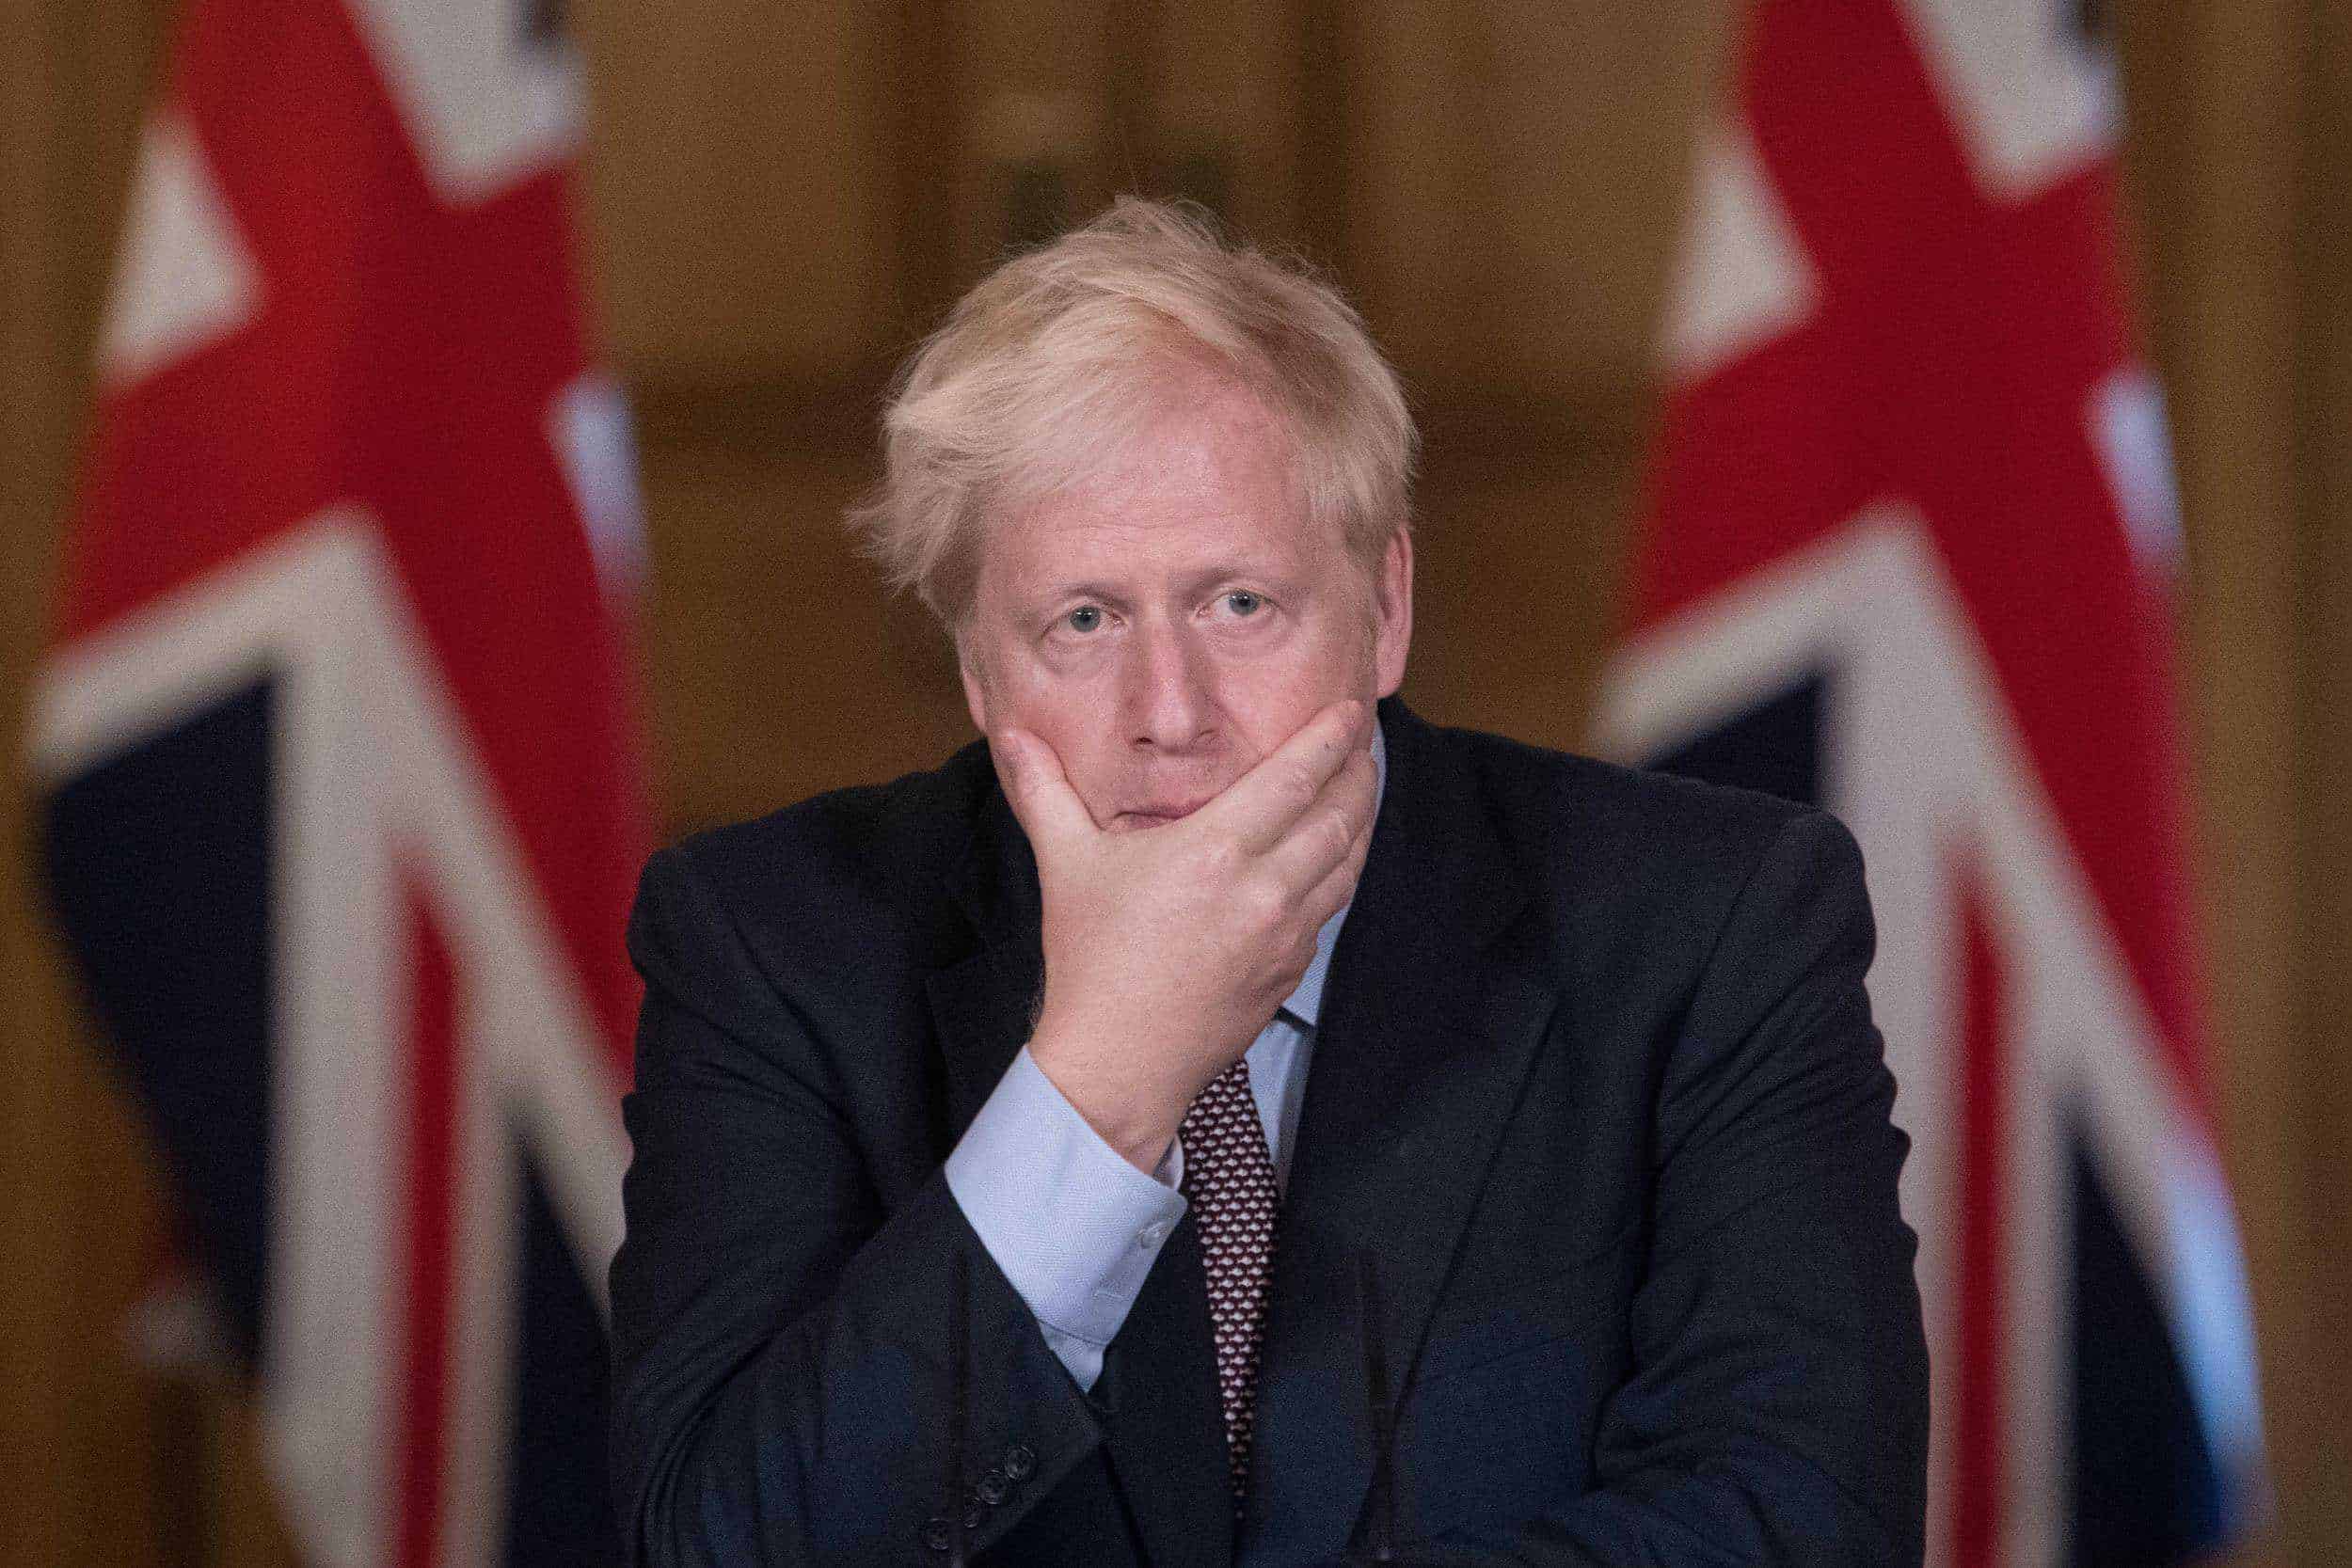 Most Brits do not think Johnson can get good Brexit deal – poll